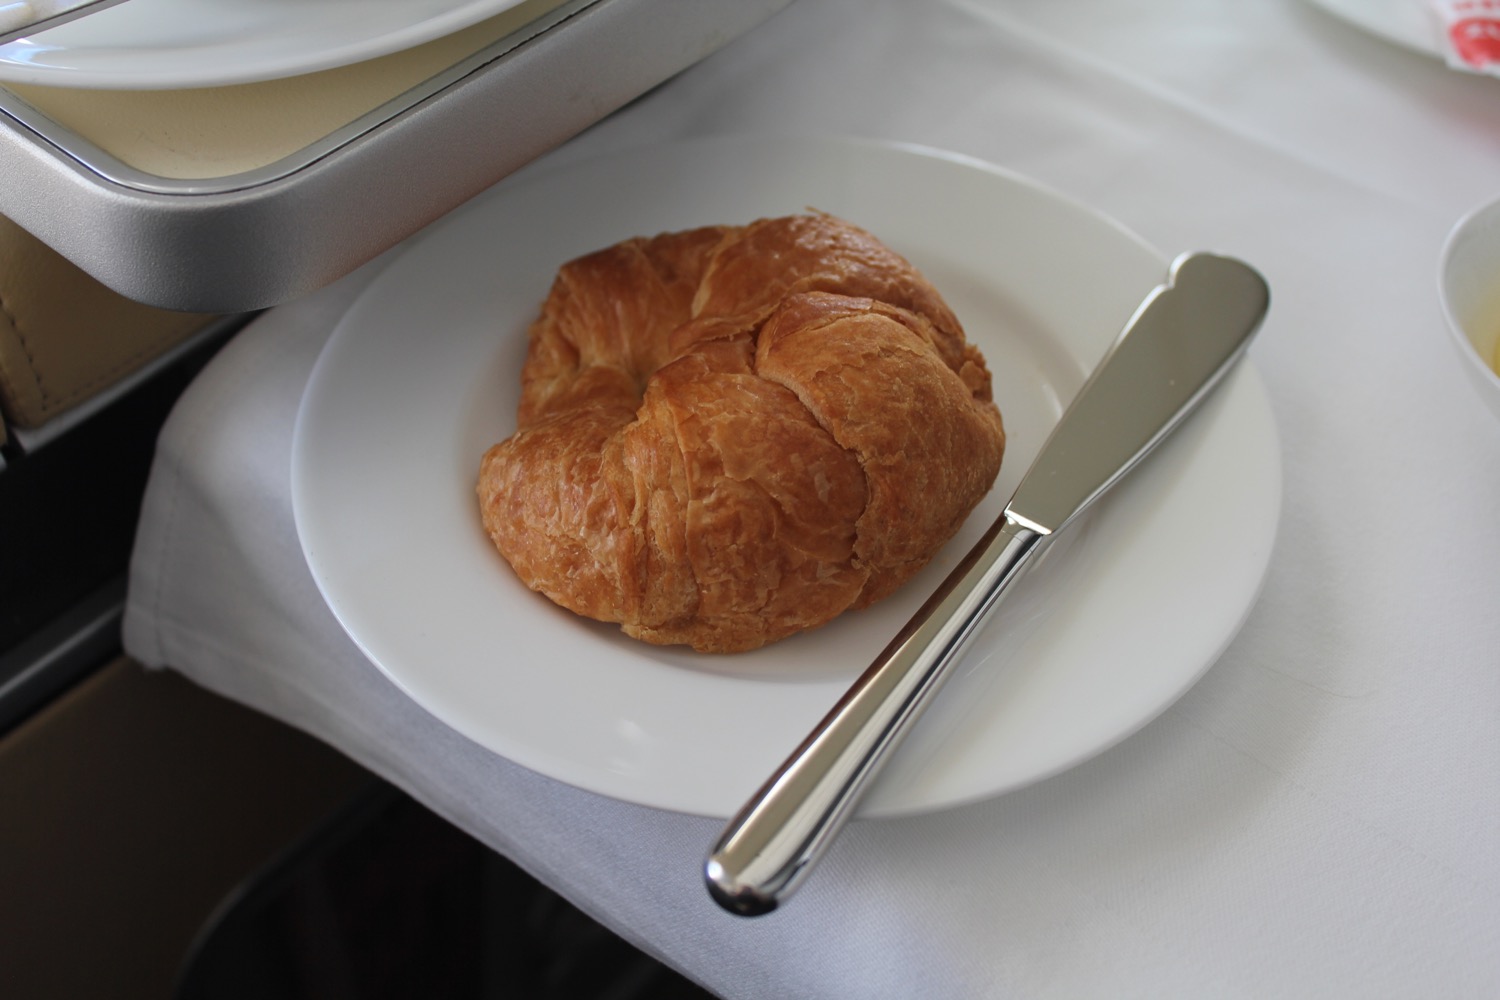 a croissant on a plate with a knife